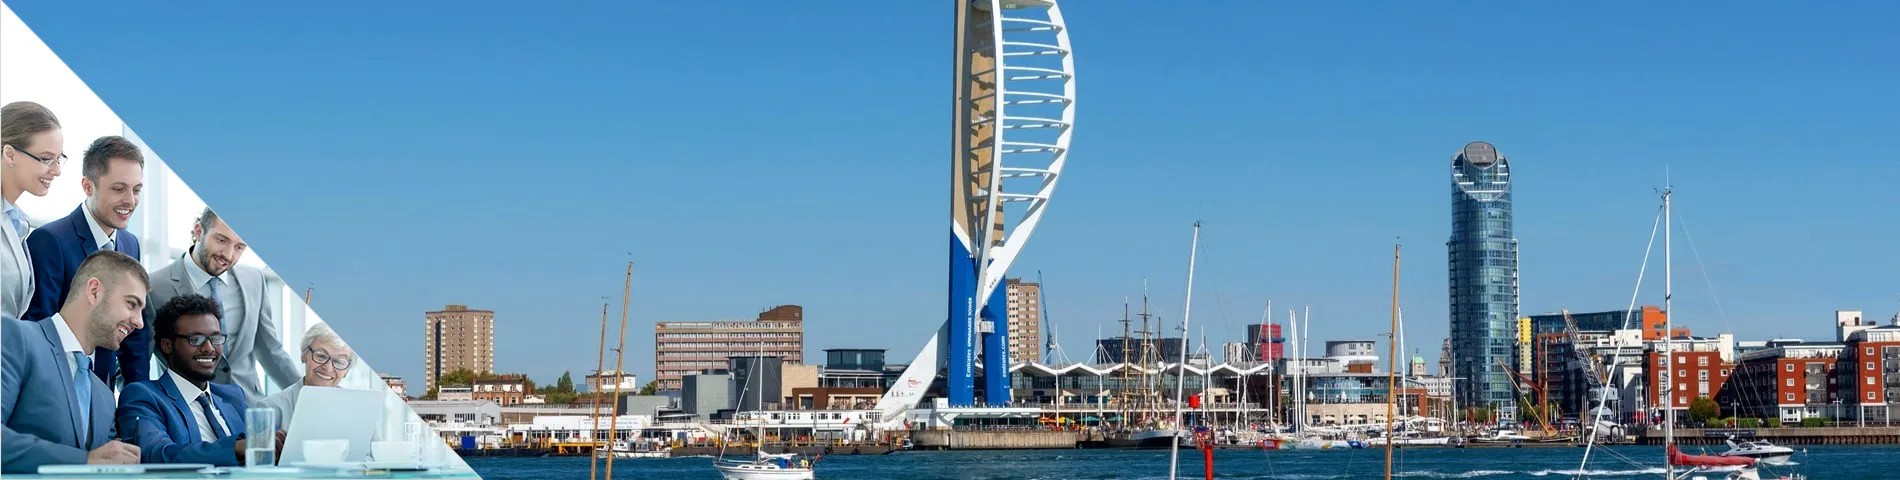 Portsmouth - Business Gruppe